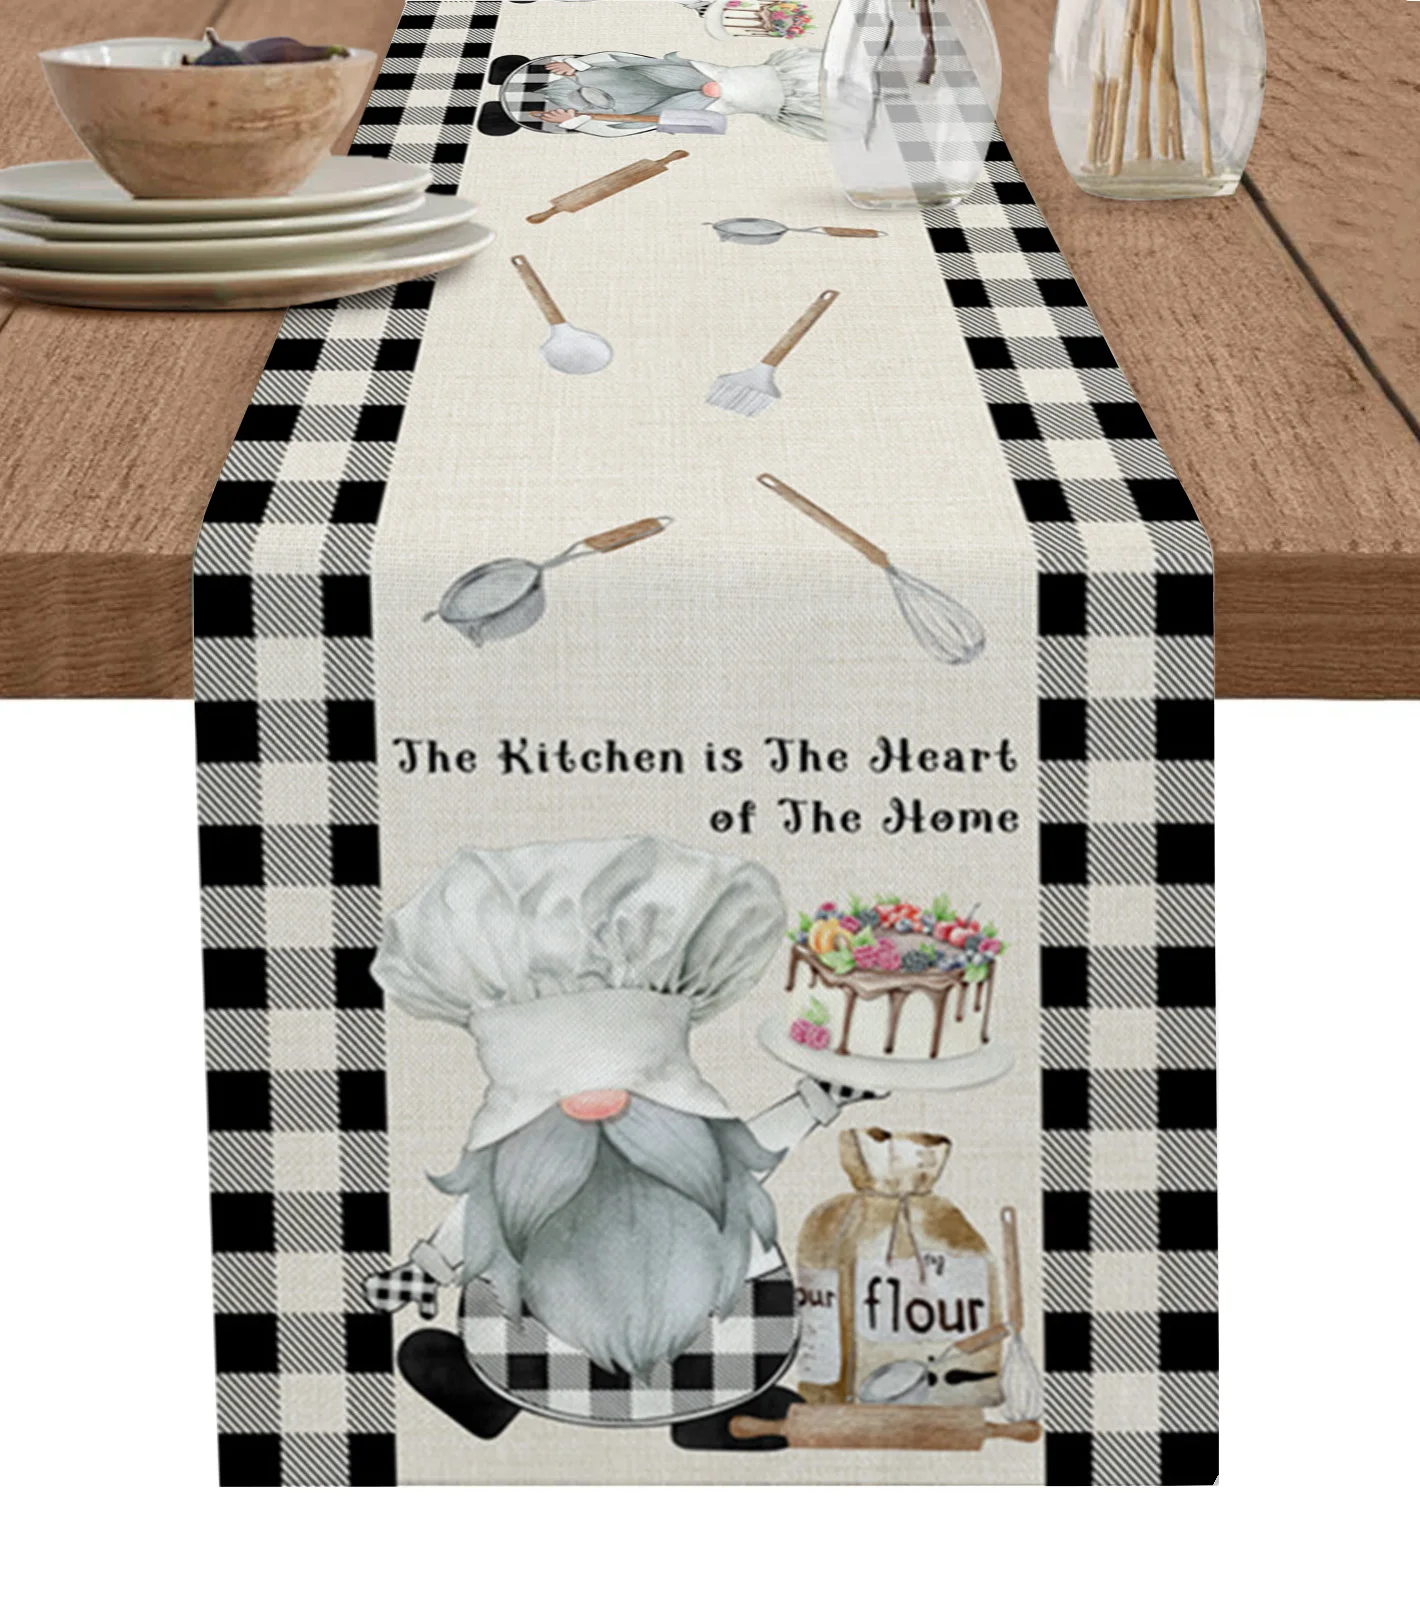 

Chef Gnome Cake Dessert Plaid Table Runner luxury Kitchen Dinner Table Cover Wedding Party Decor Cotton Linen Tablecloth